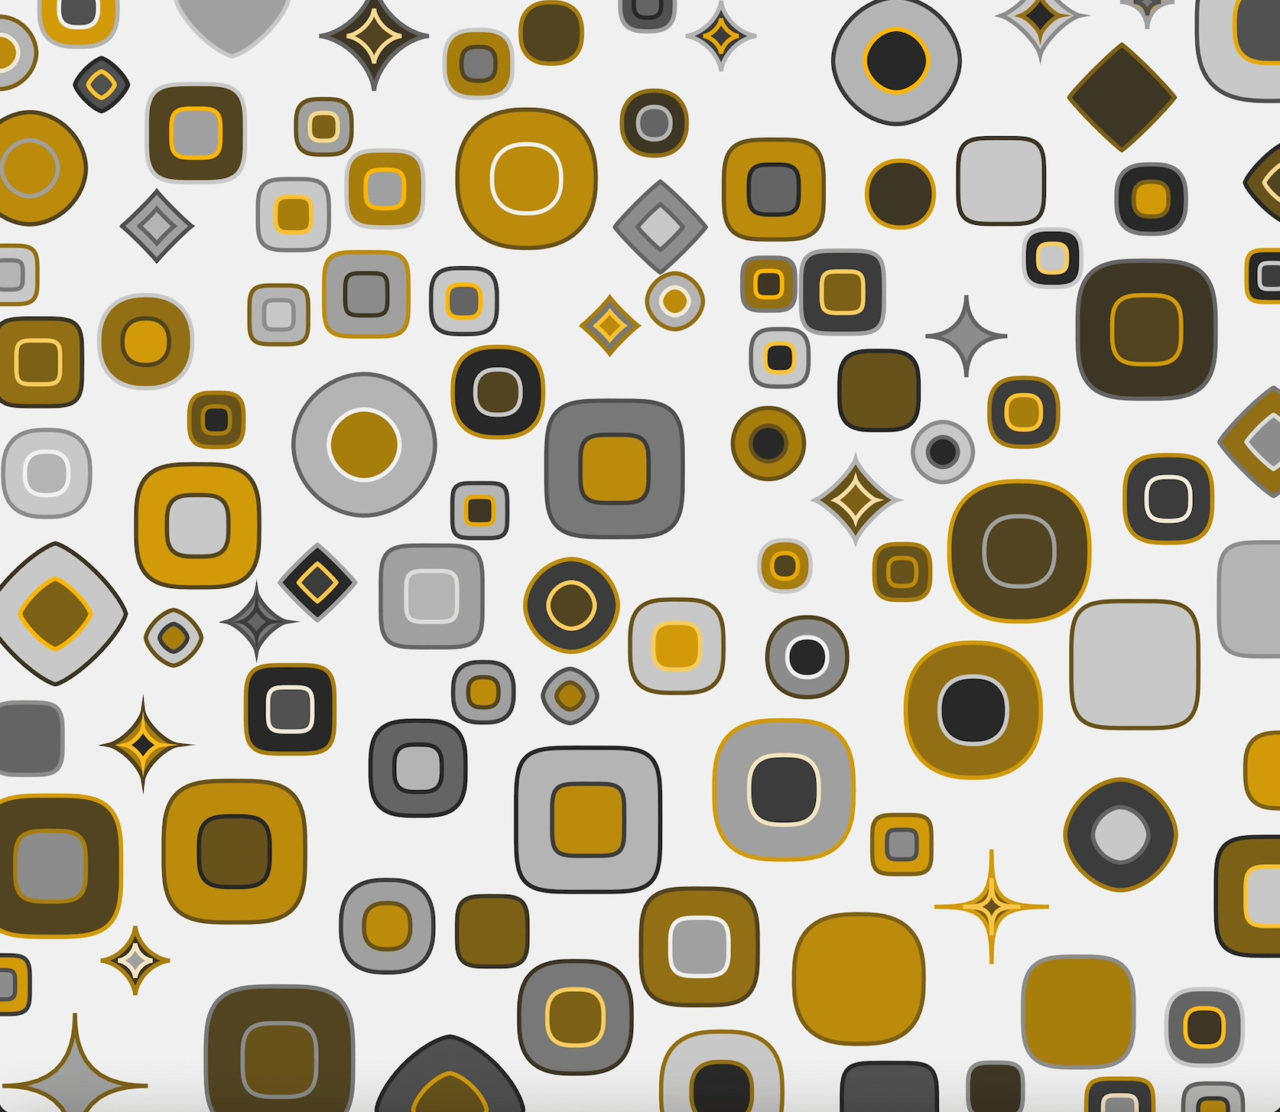 Grey, black, dark brown, and dark yellow squares with rounded edges against a white background